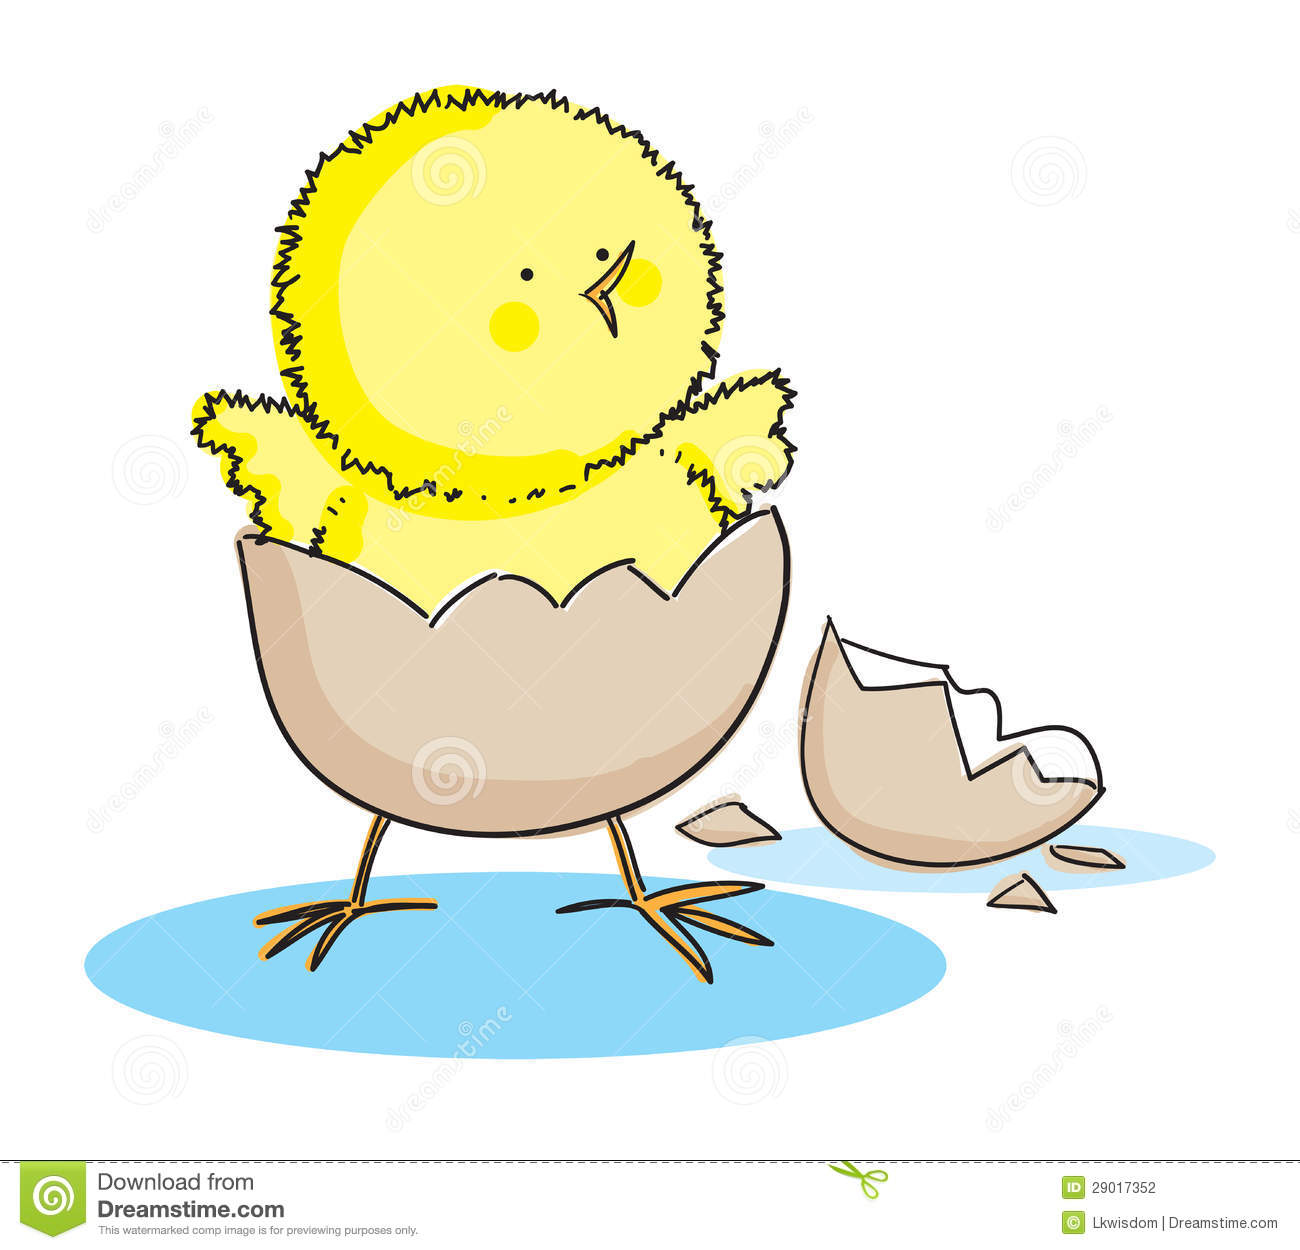 Hand Drawn Picture Of A Hatching Easter Chick Illustrated In A Loose